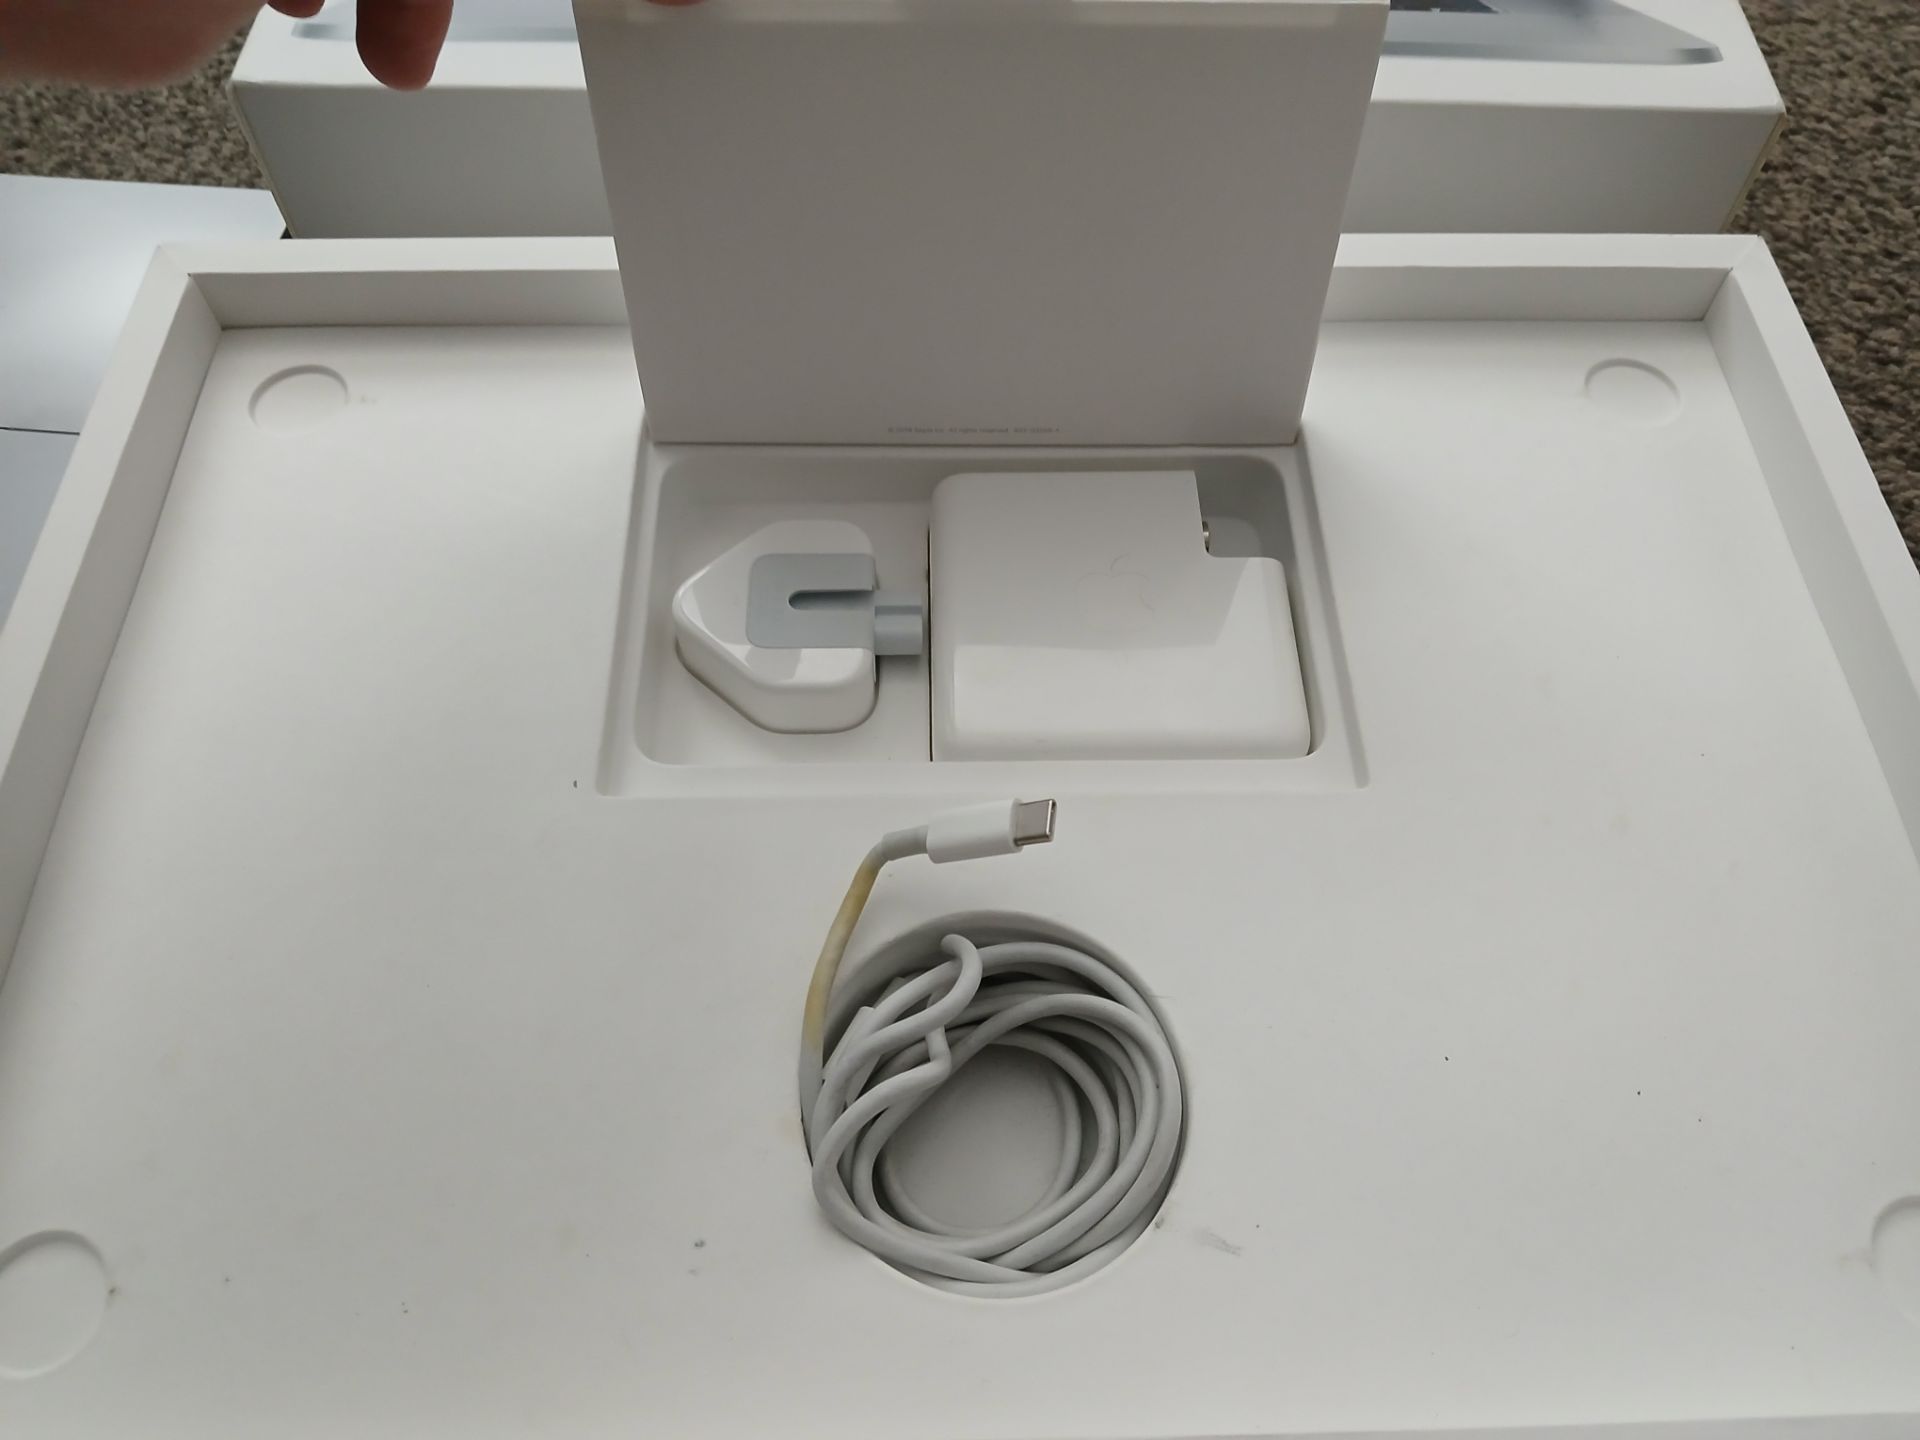 Apple MacBook Pro (16”, 2019) with charger, Serial Number C02DD108MD6M (Please refer to the pictures - Bild 4 aus 6